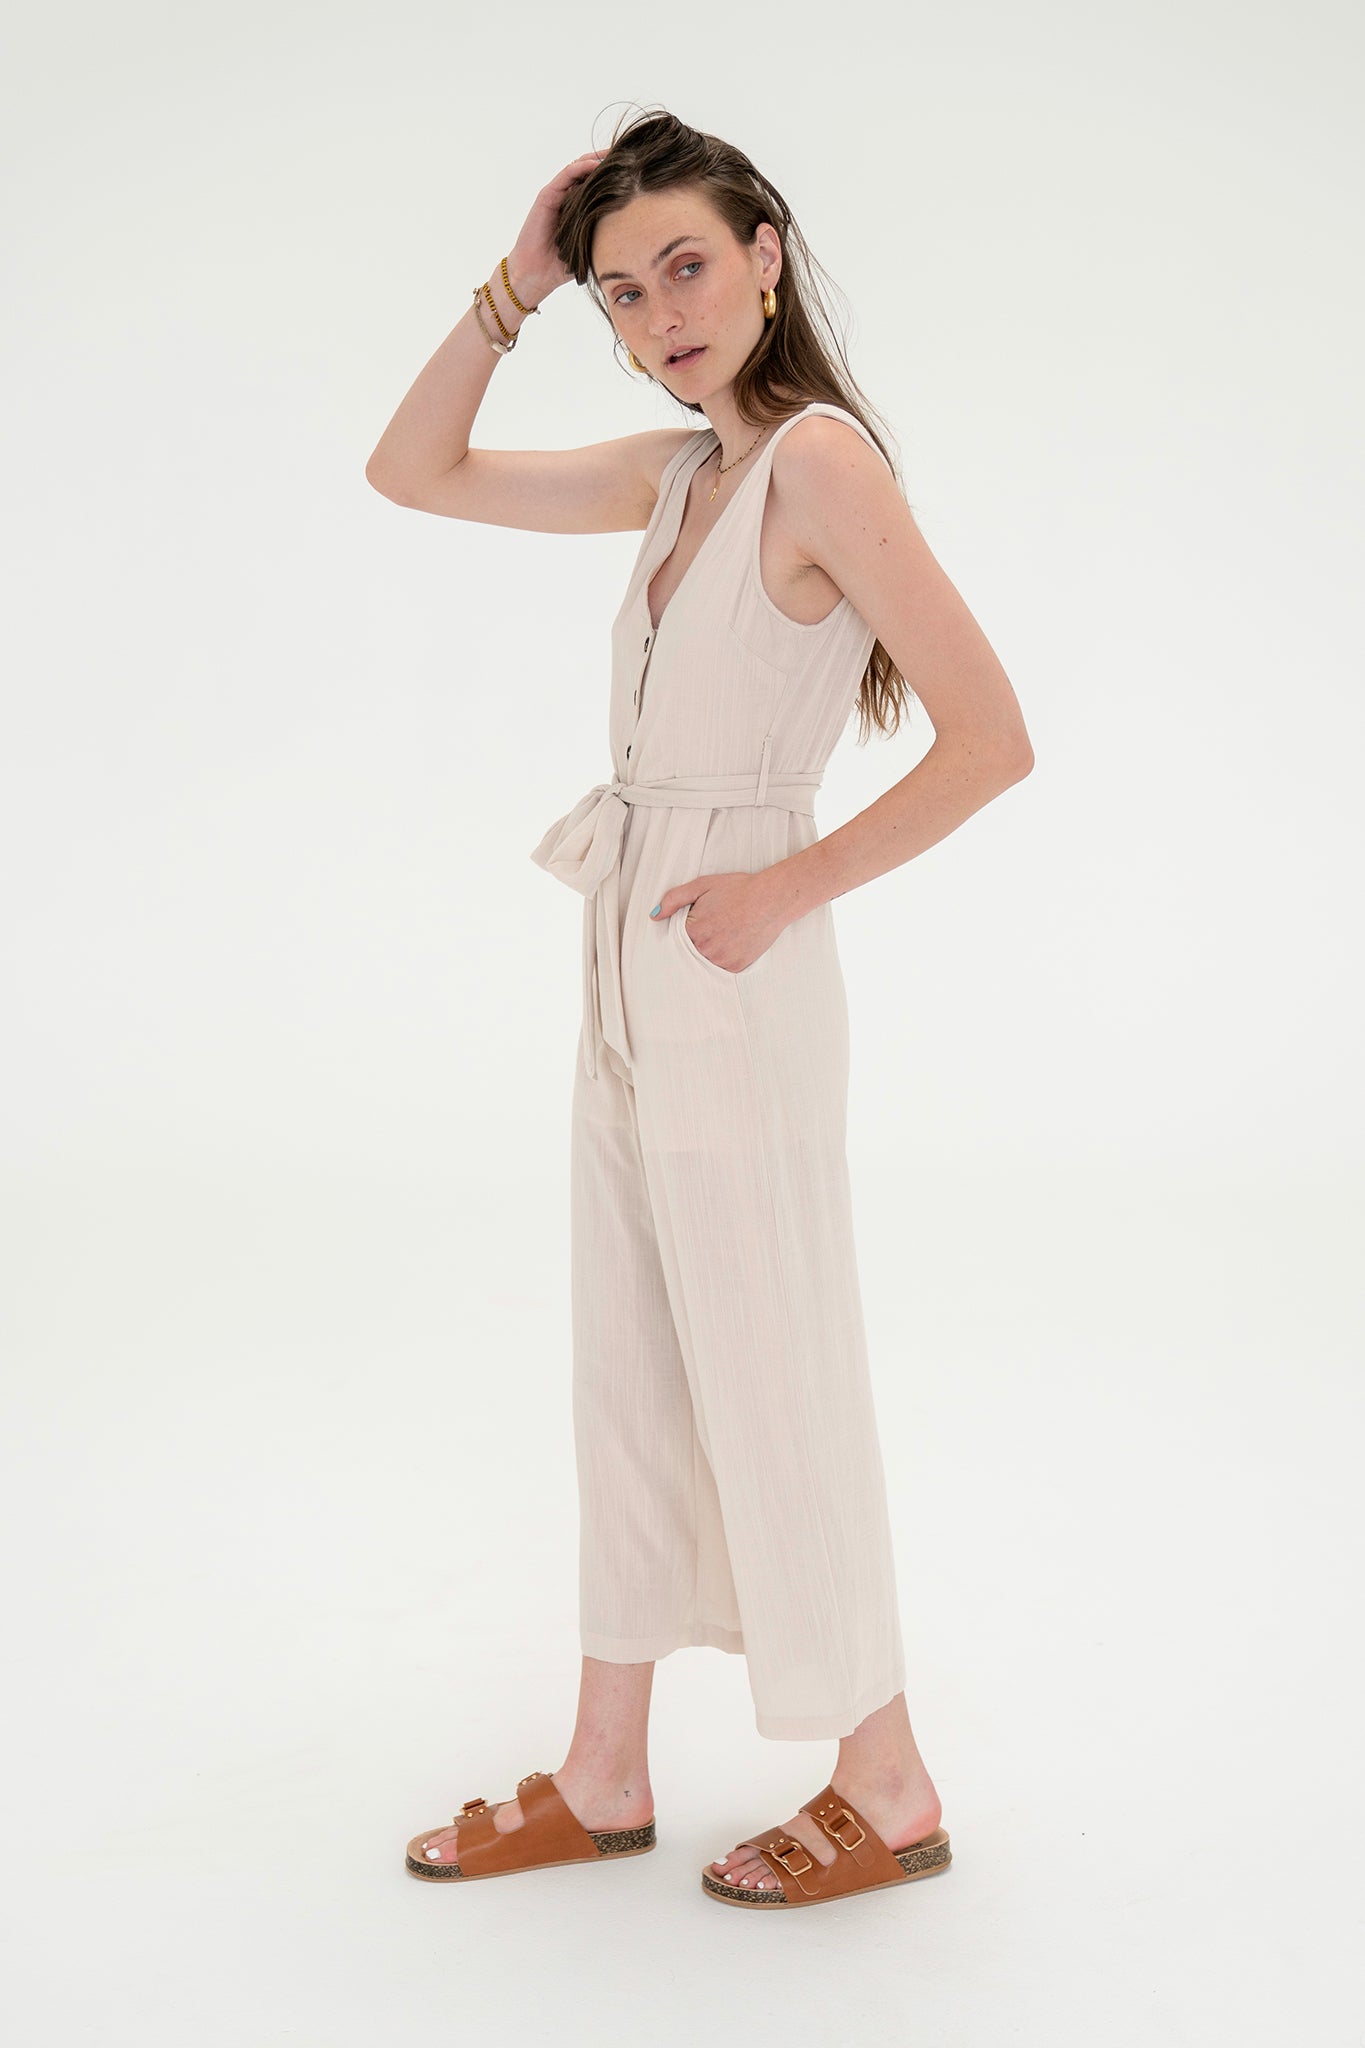 View 7 of Medanos Jumpsuit, a Jumpsuits from Larrea Cove. Detail: .